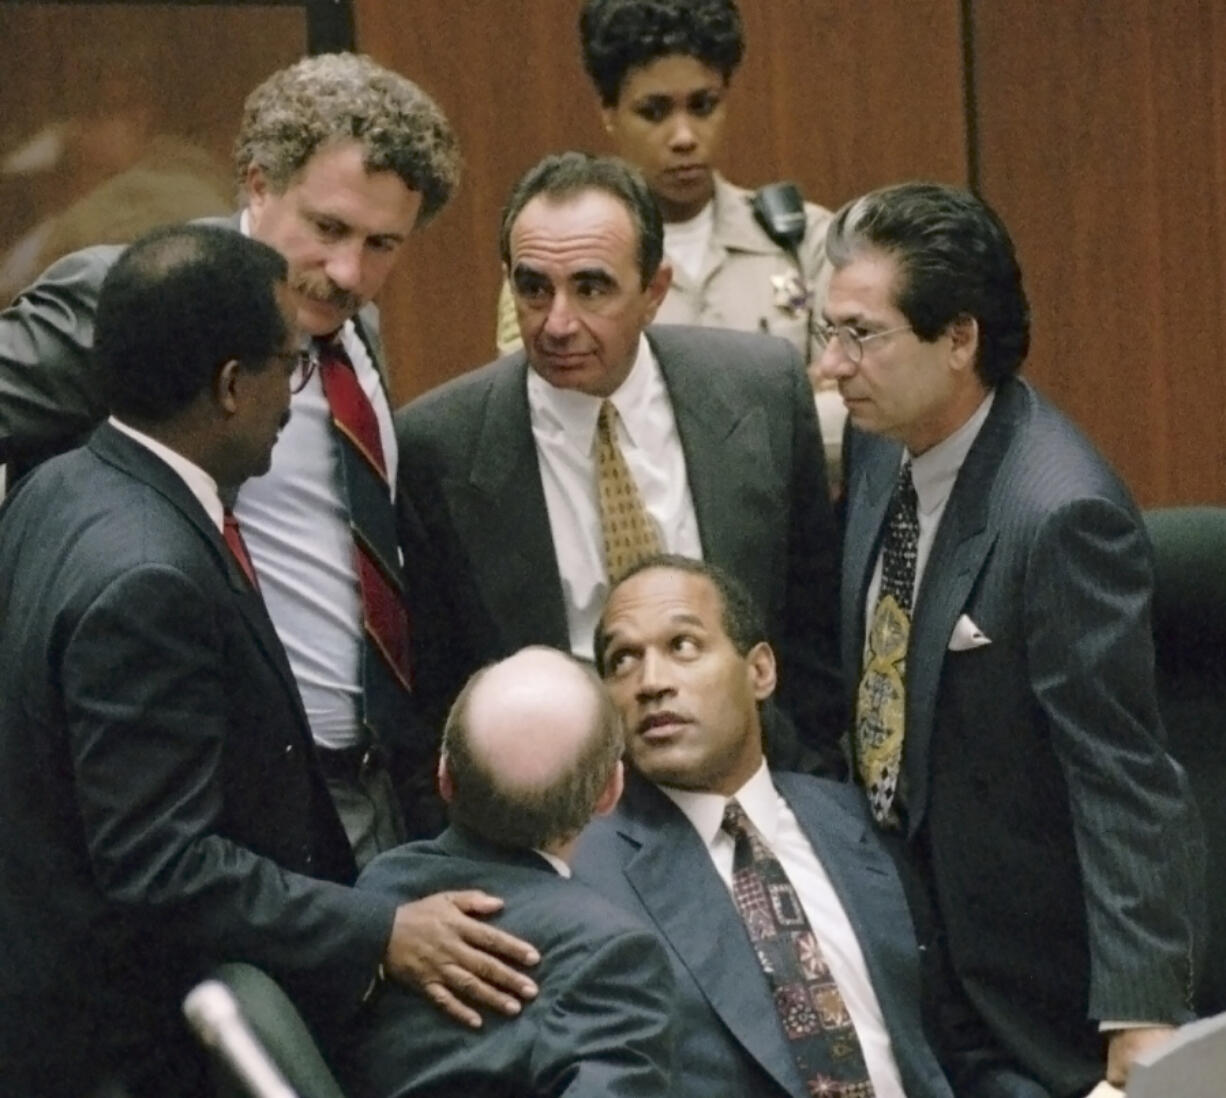 FILE- Defendant O.J. Simpson is surrounded by his defense attorneys, from left, Johnnie L. Cochran Jr., Peter Neufeld, Robert Shapiro, Robert Kardashian, and Robert Blasier, seated at left, at the close of defense arguments in his murder trial, Thursday, Sept. 28, 1995, in Los Angeles. Simpson, the decorated football superstar and Hollywood actor who was acquitted of charges he killed his former wife and her friend but later found liable in a separate civil trial, has died. He was 76.